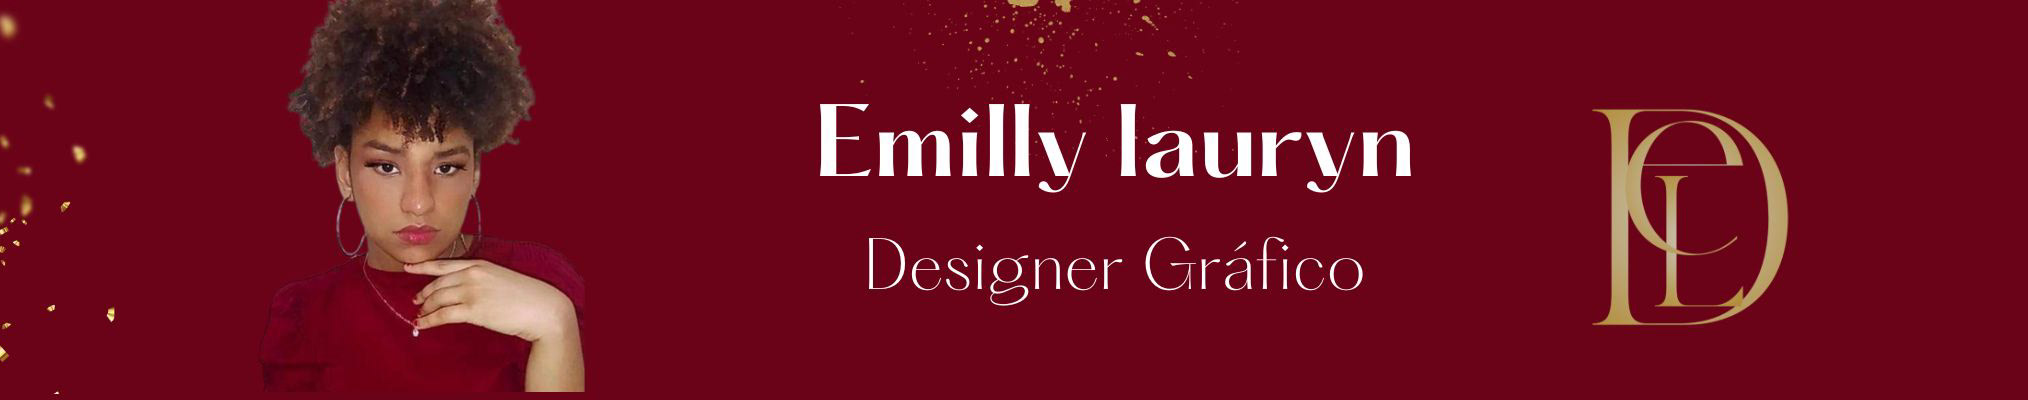 Emilly Lauryn's profile banner